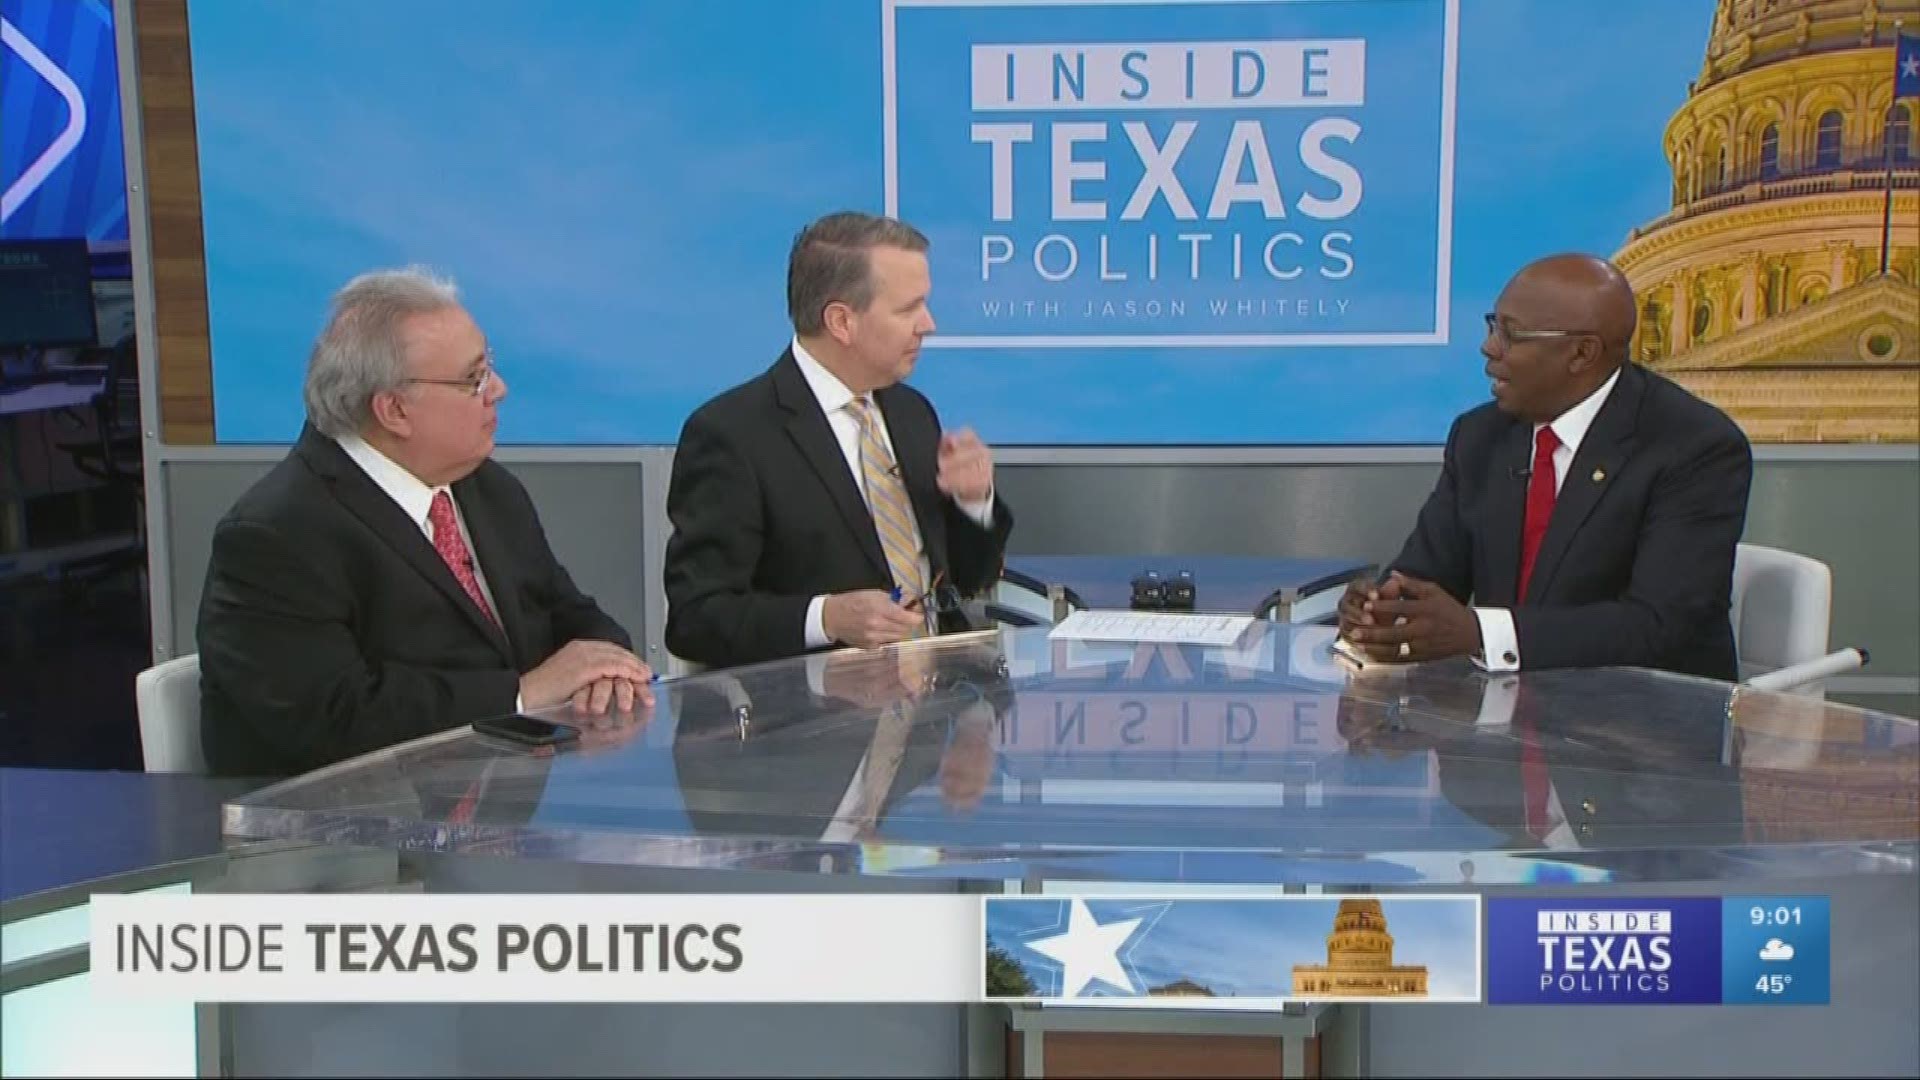 Dallas City Councilman Tennell Atkins joined host Jason Whitely and Bud Kennedy to discuss what the city plans to do to bring big business in to the city itself.